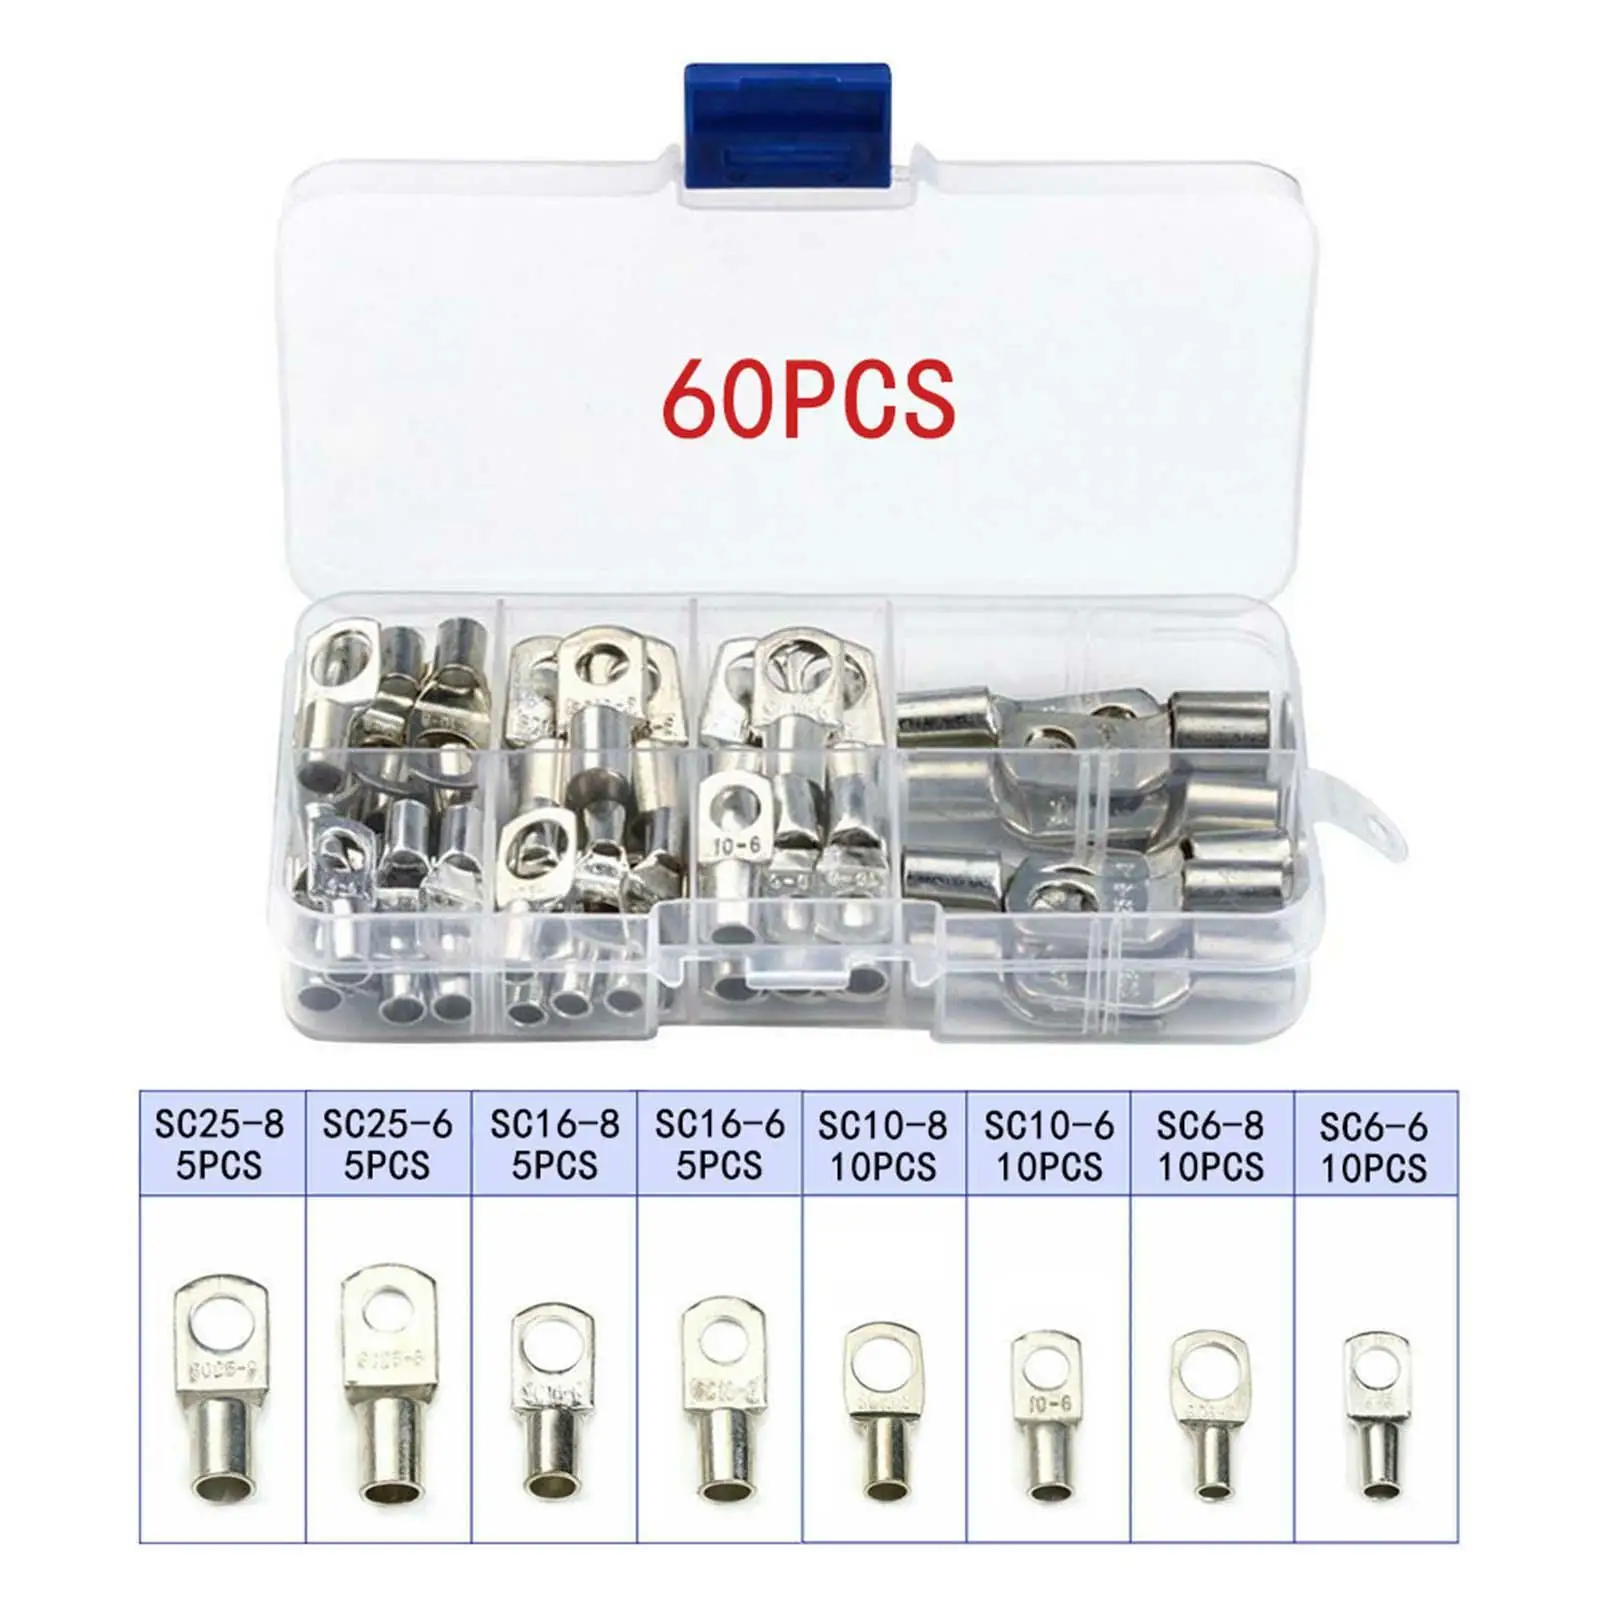 60Pcs Battery Rings Terminal Connector, Tubular Electrical Wire End Cable Lugs, Tinned Copper Eyelets